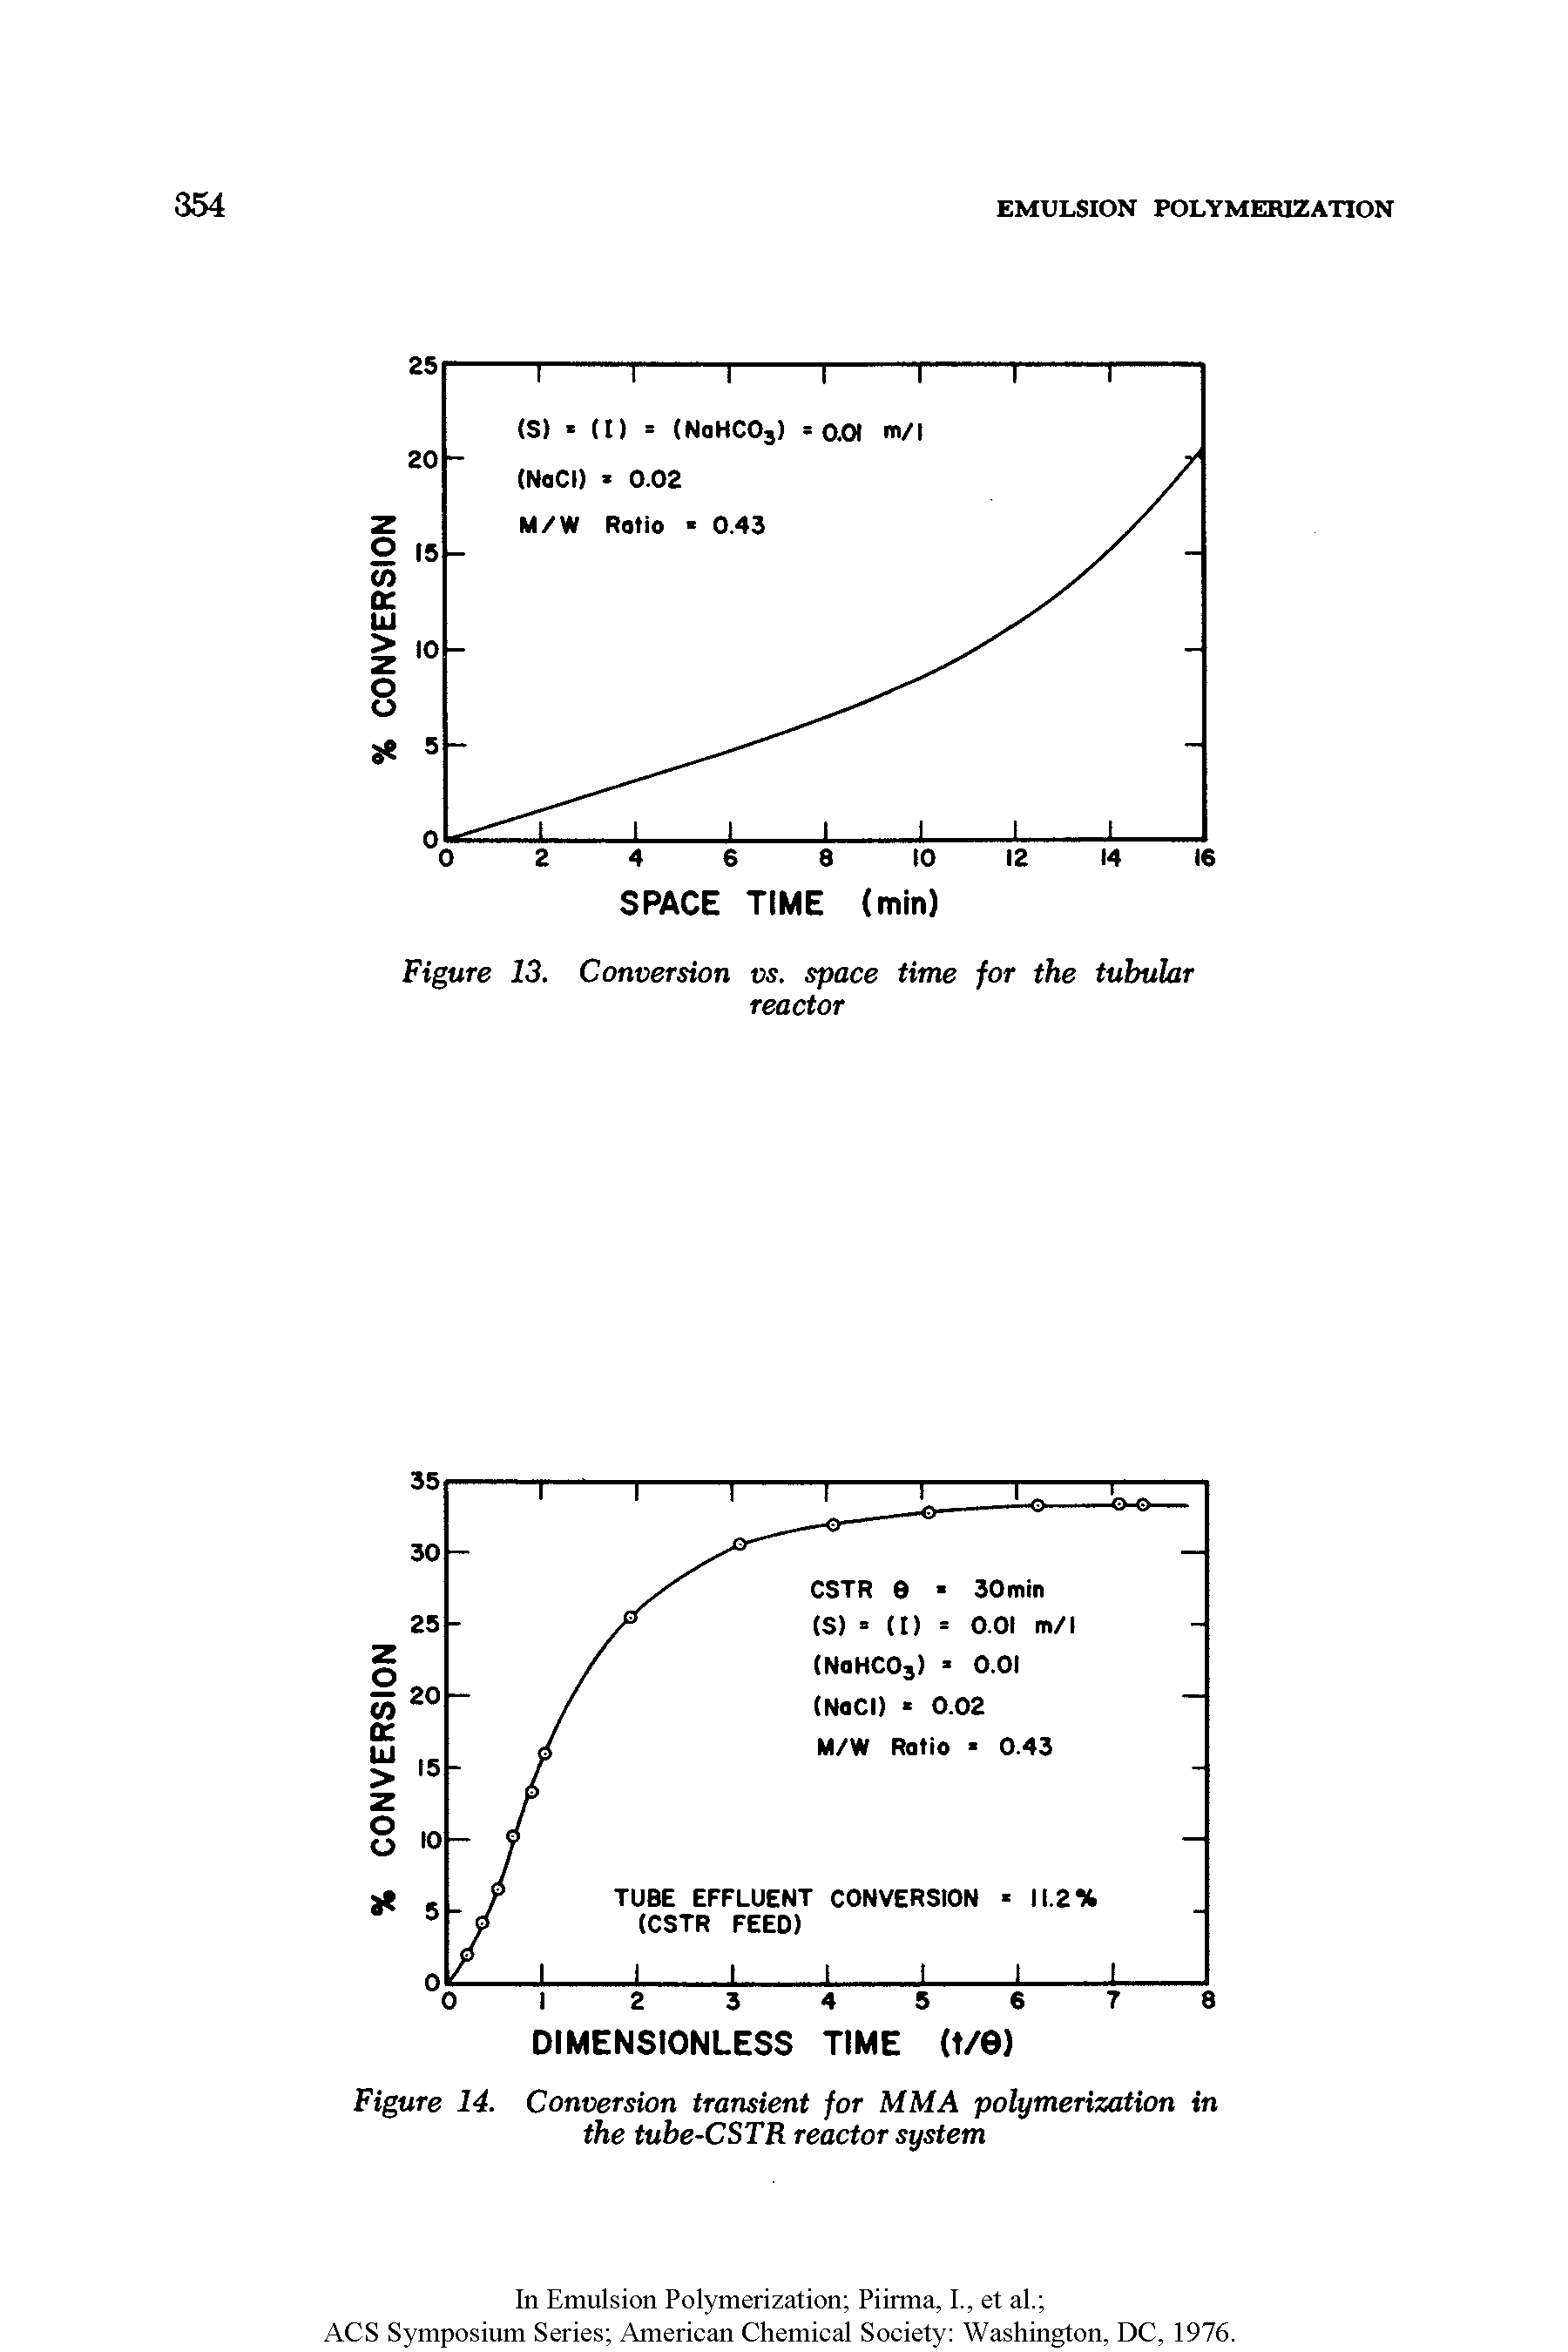 Figure 13. Conversion vs. space time for the tubular reactor...